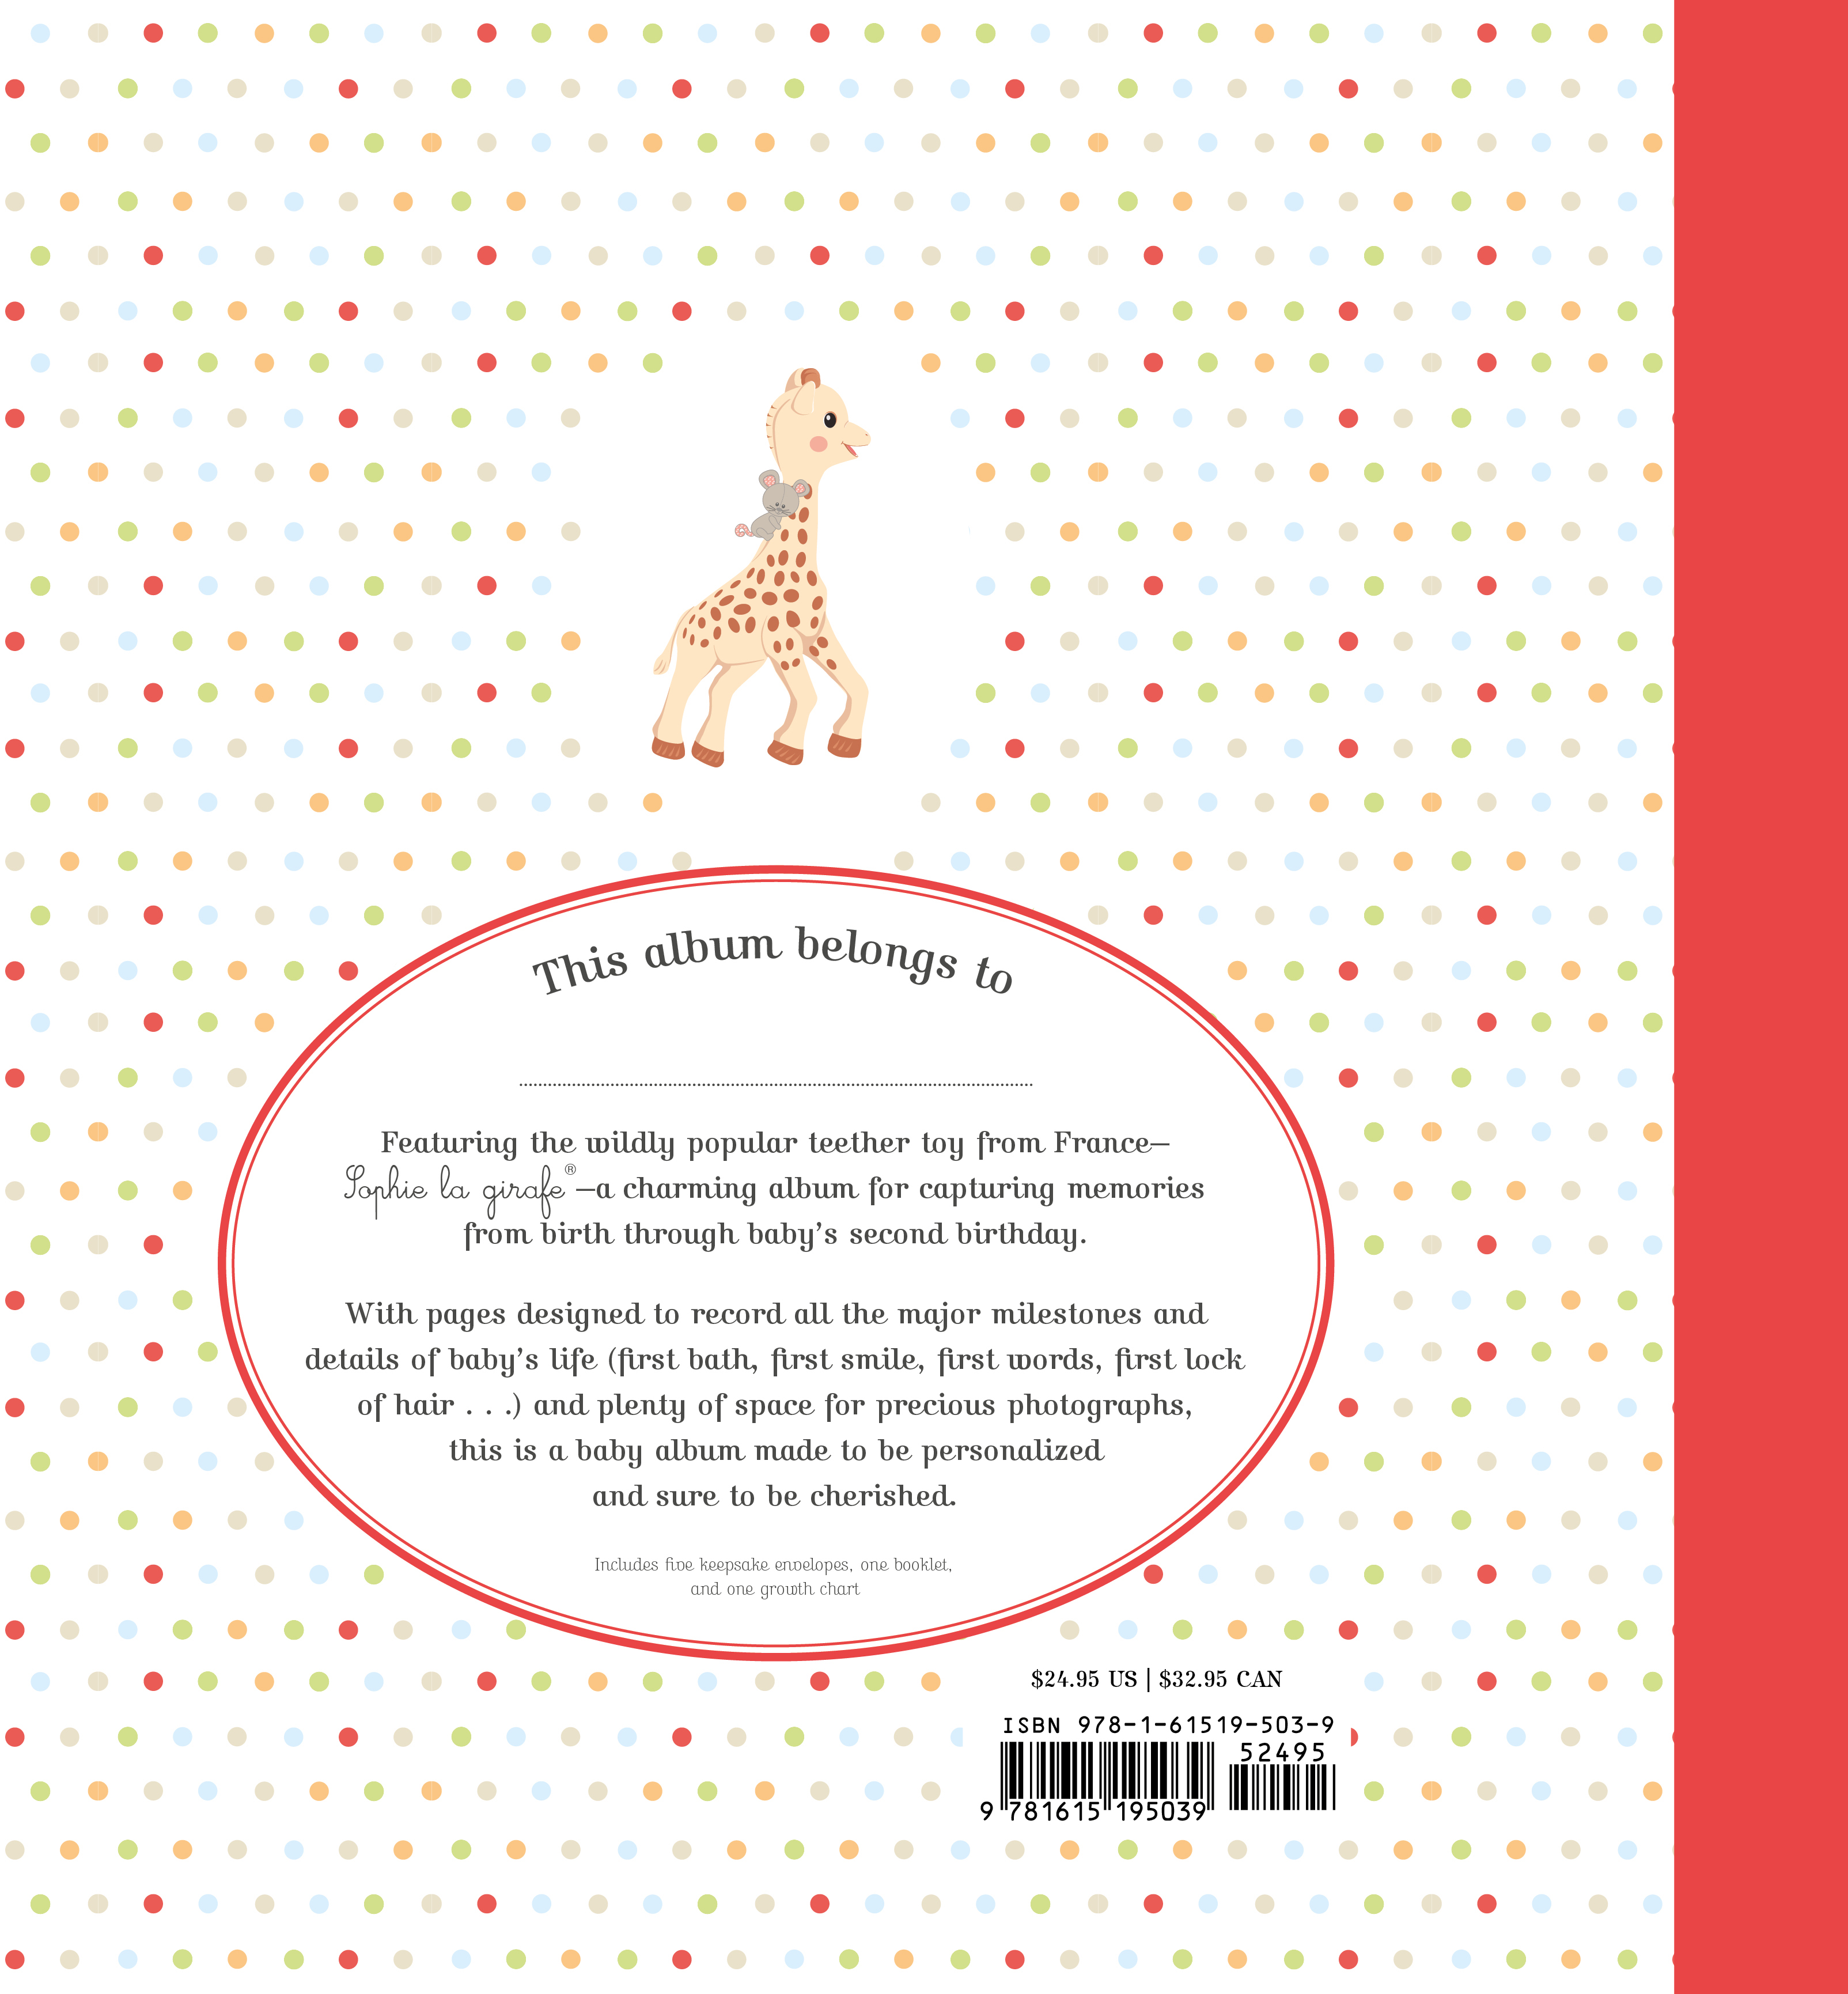 My Baby Album With Sophie La Girafe Second Edition Workman Publishing